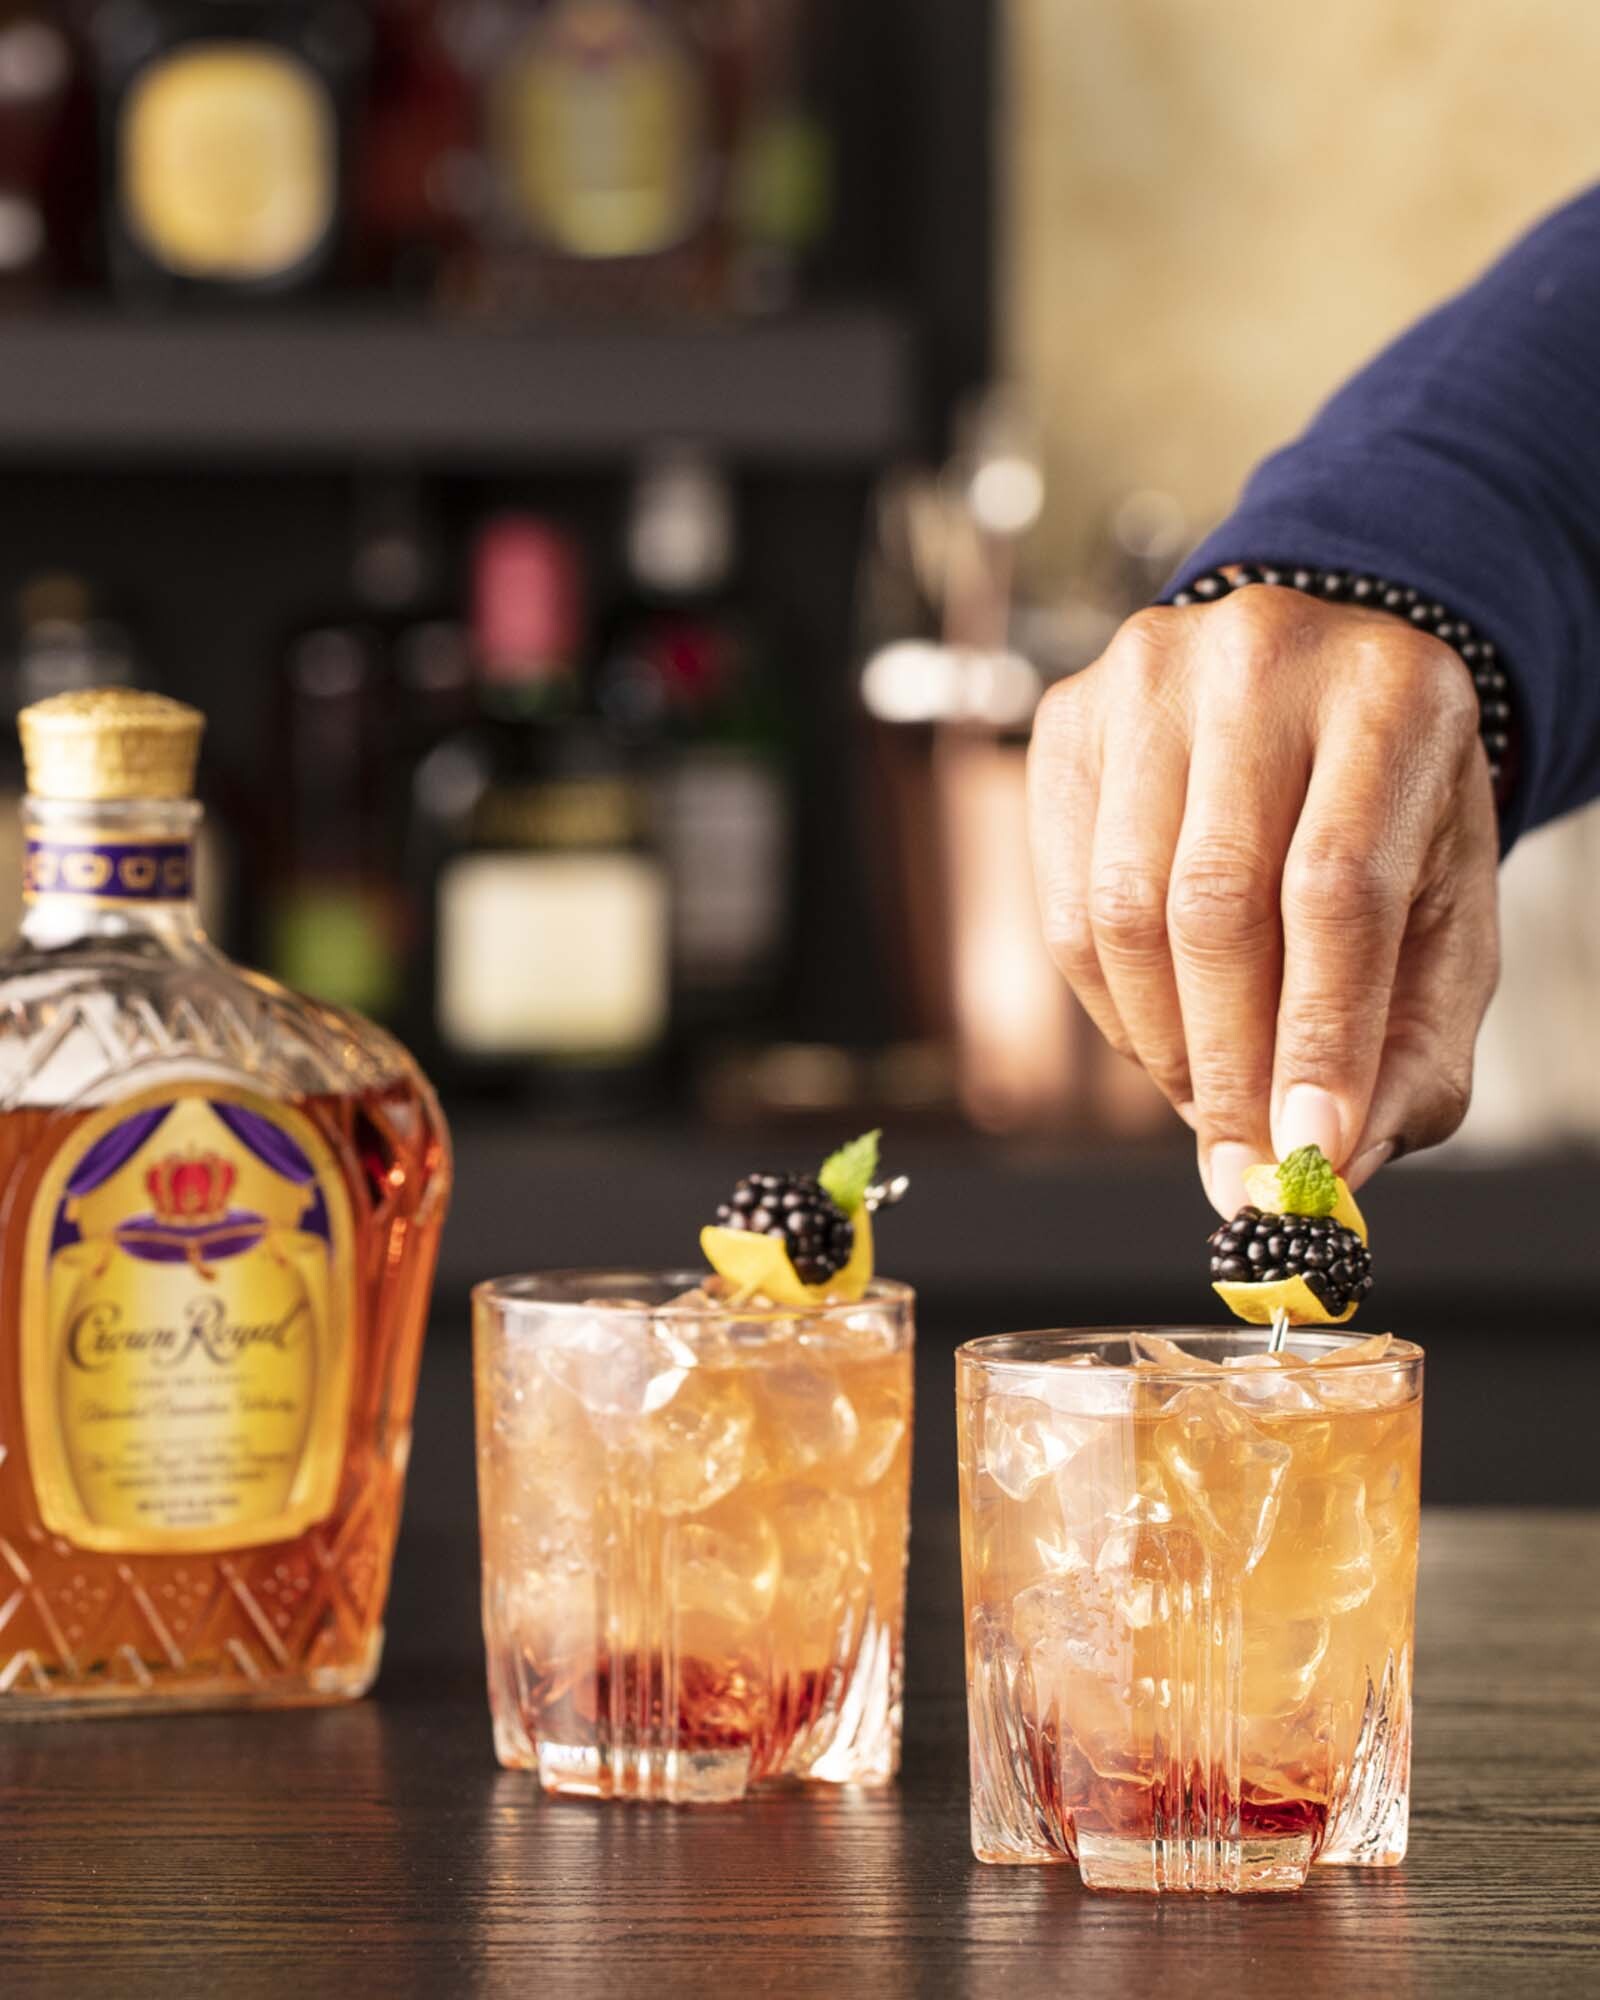 Crown Royal Blackberry Whisky Sour Whisky Cocktail